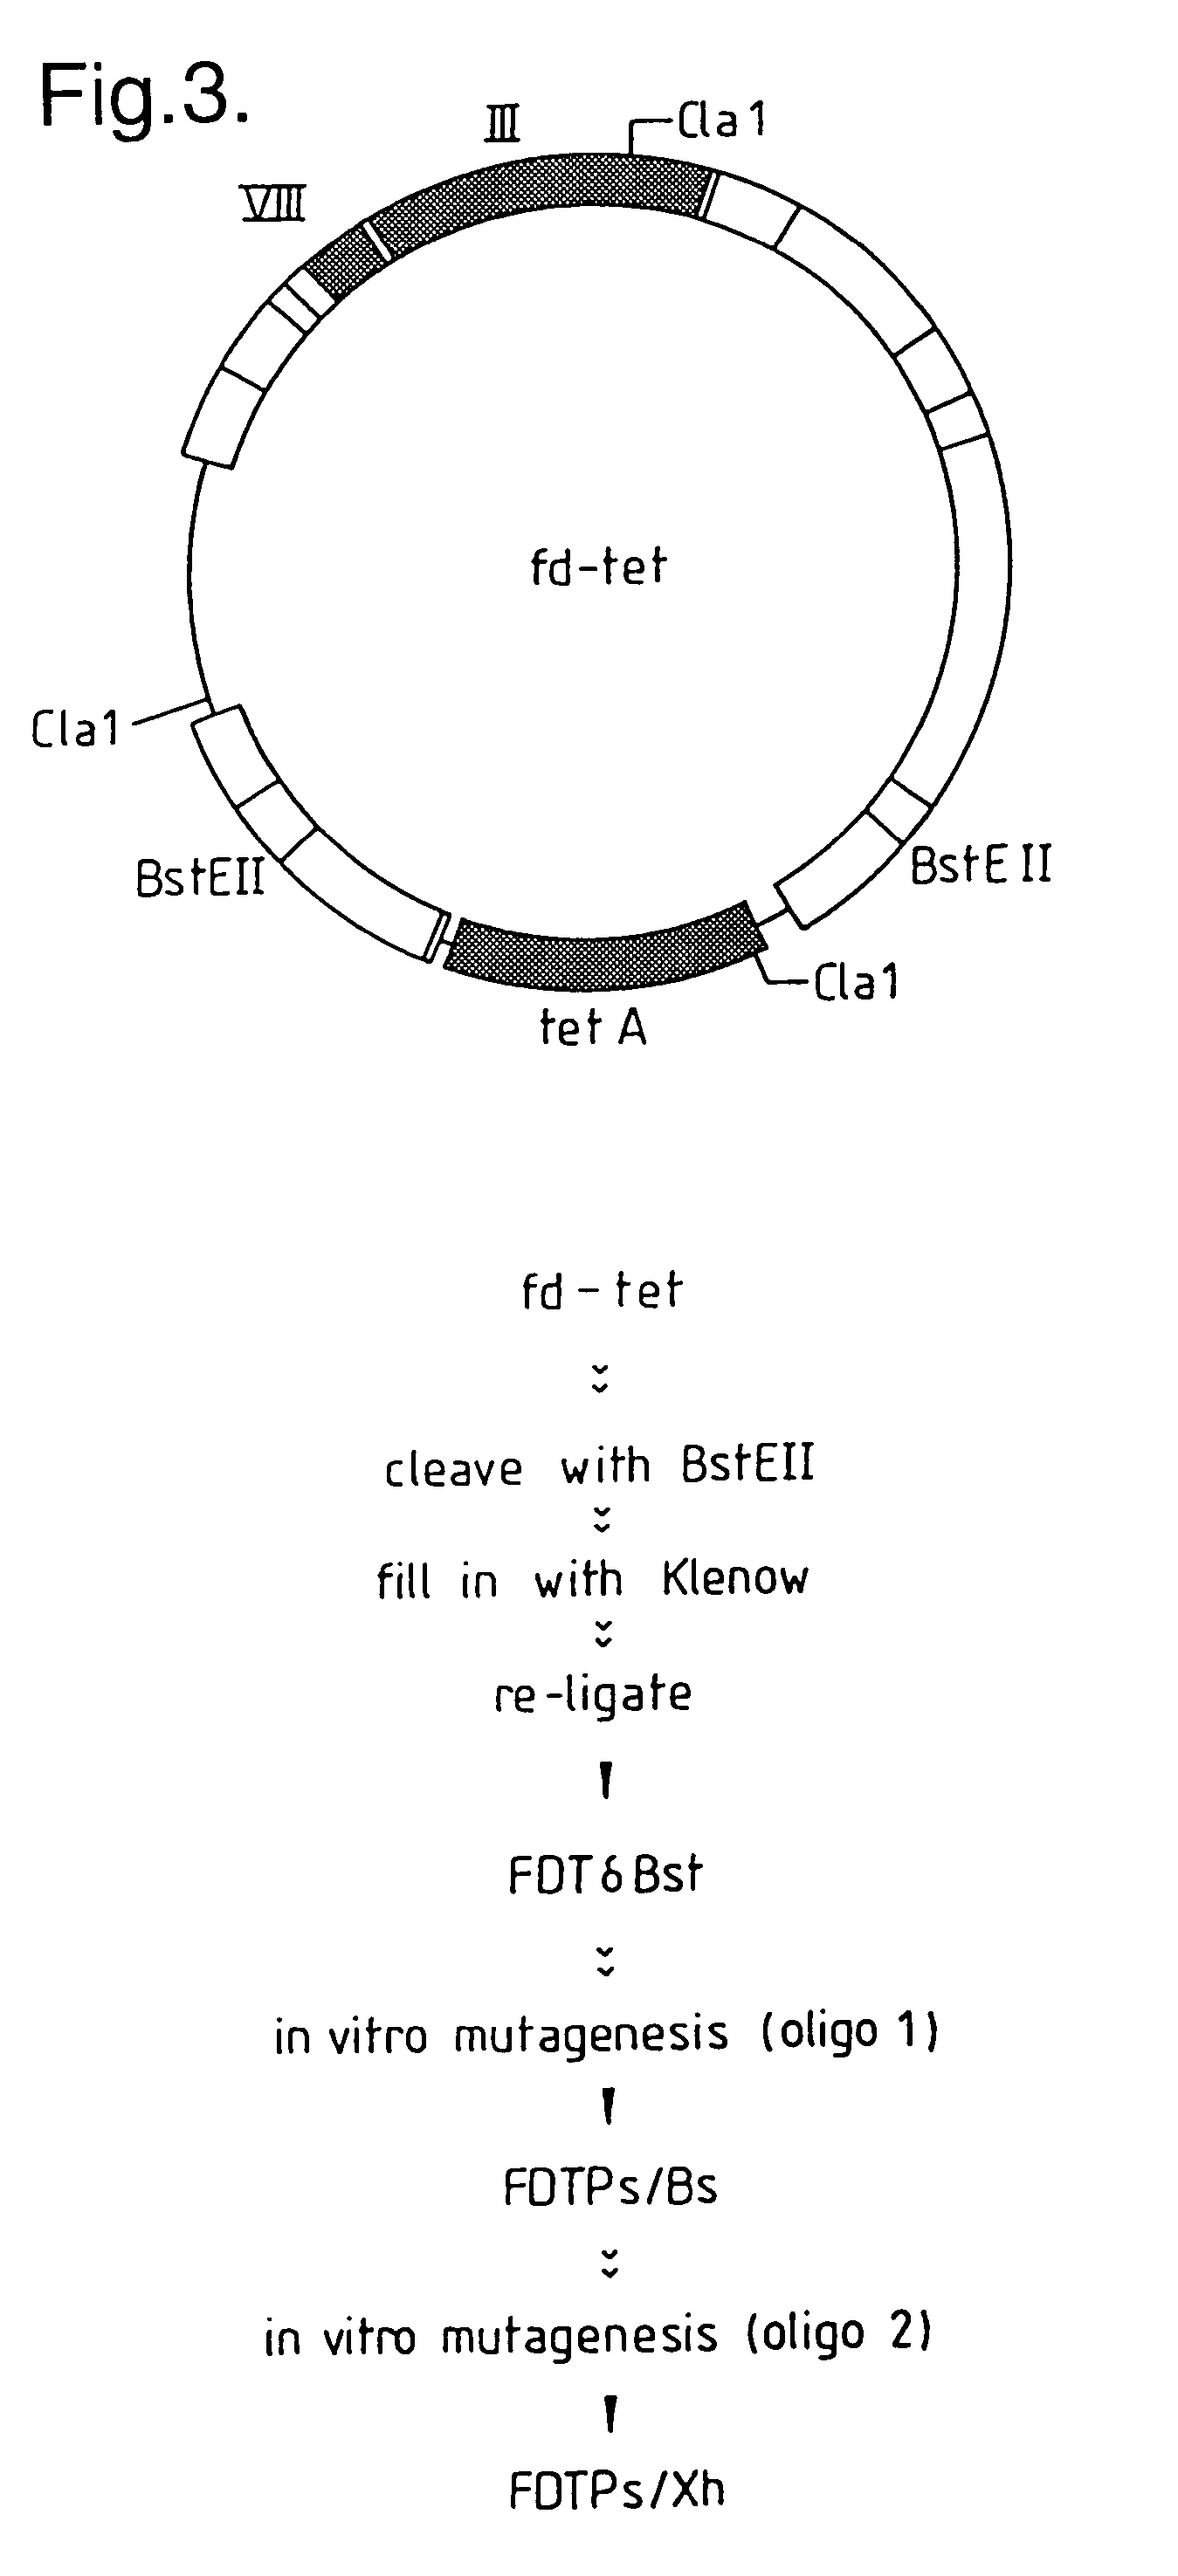 Methods for producing members of specific binding pairs